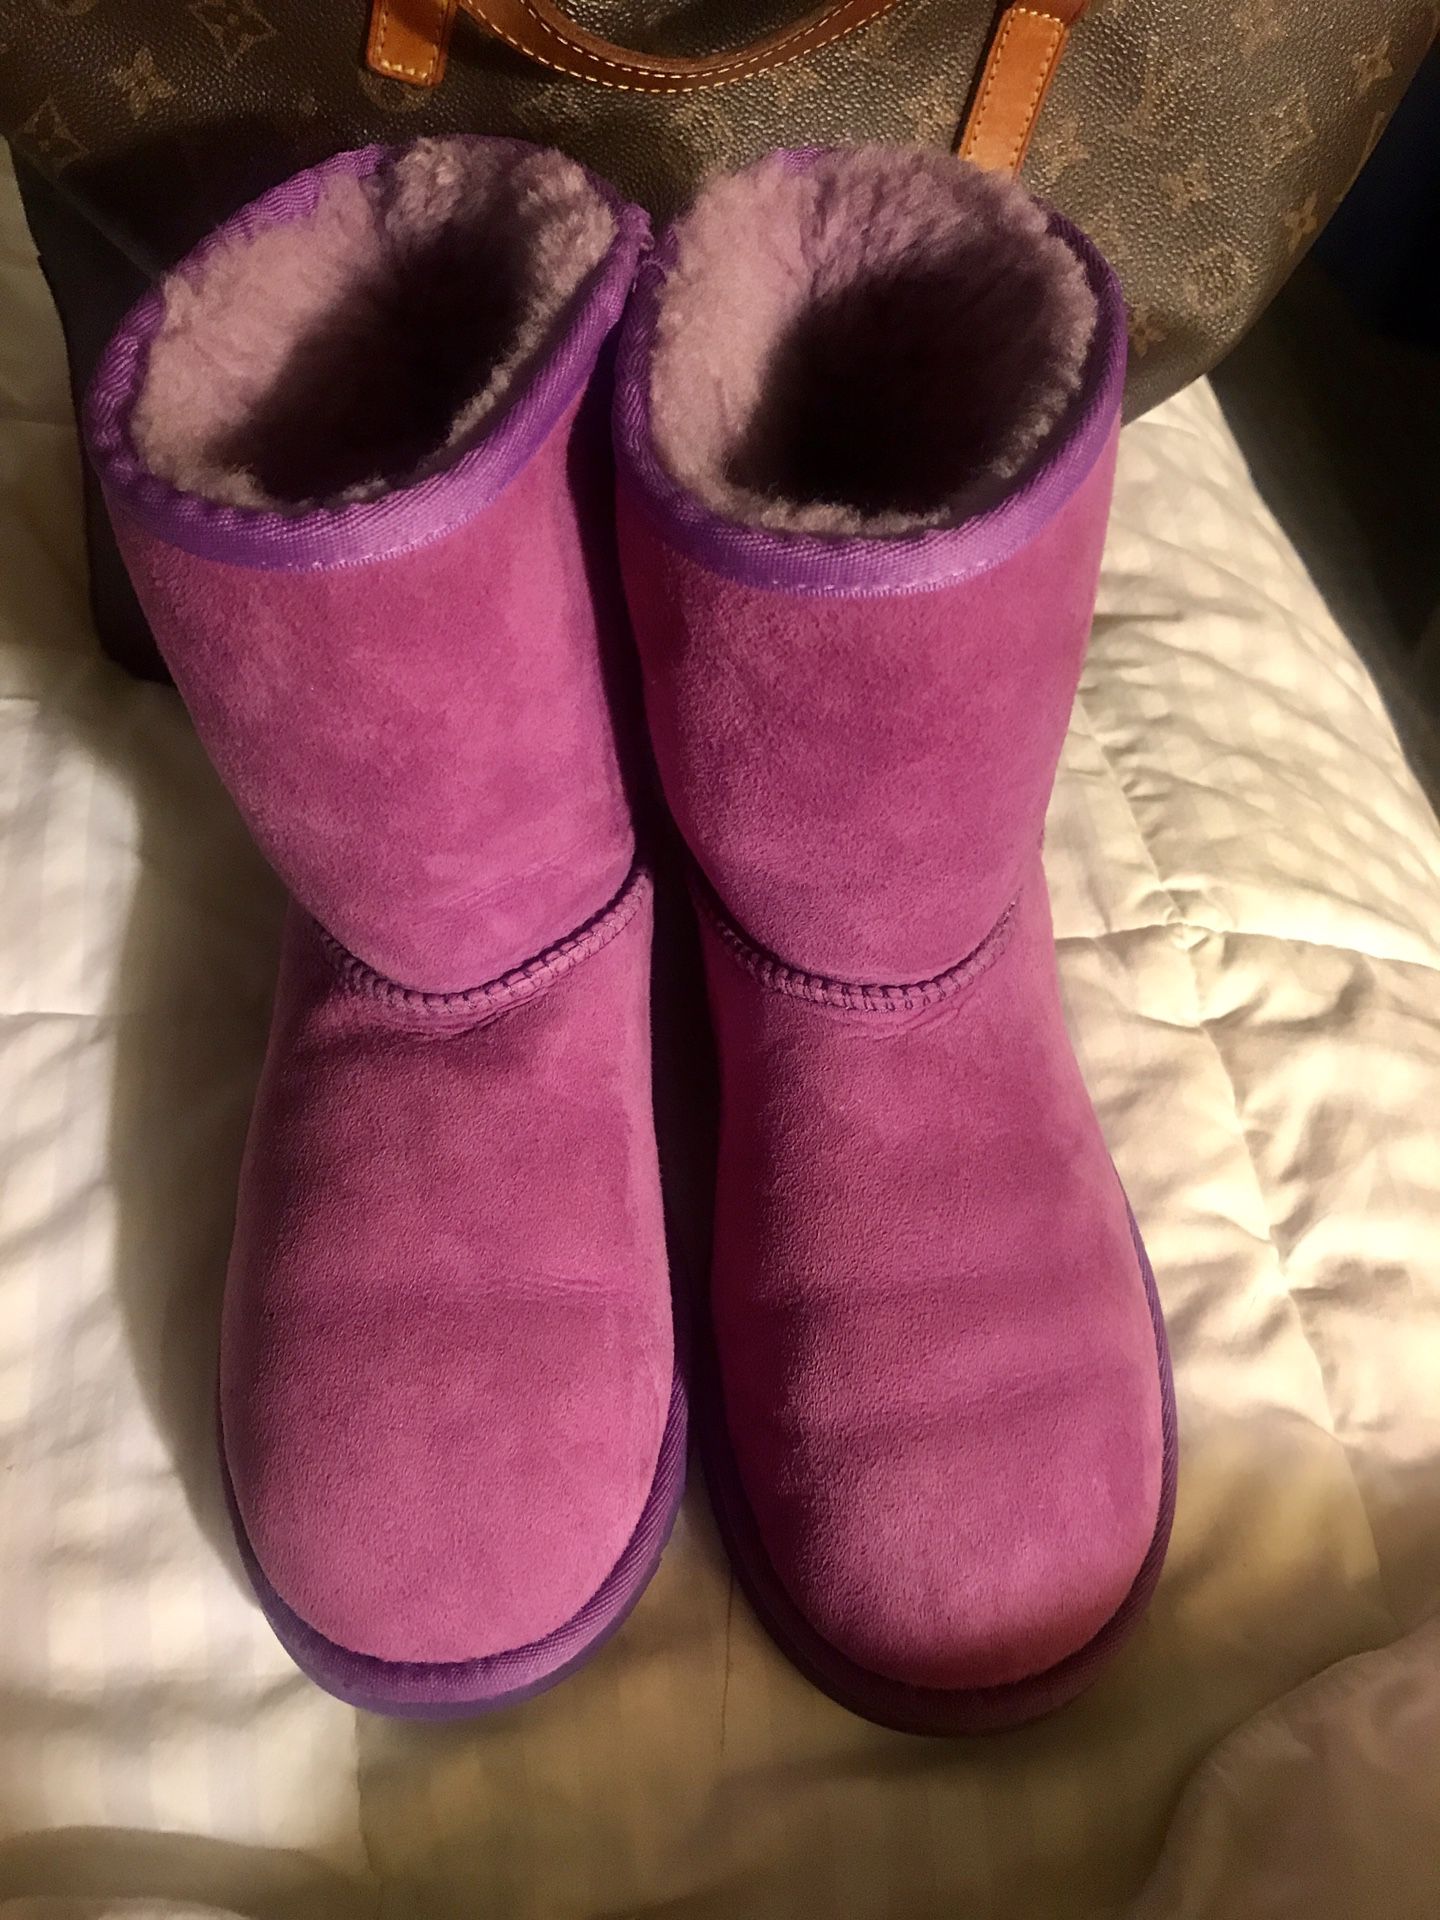 Uggs size 5